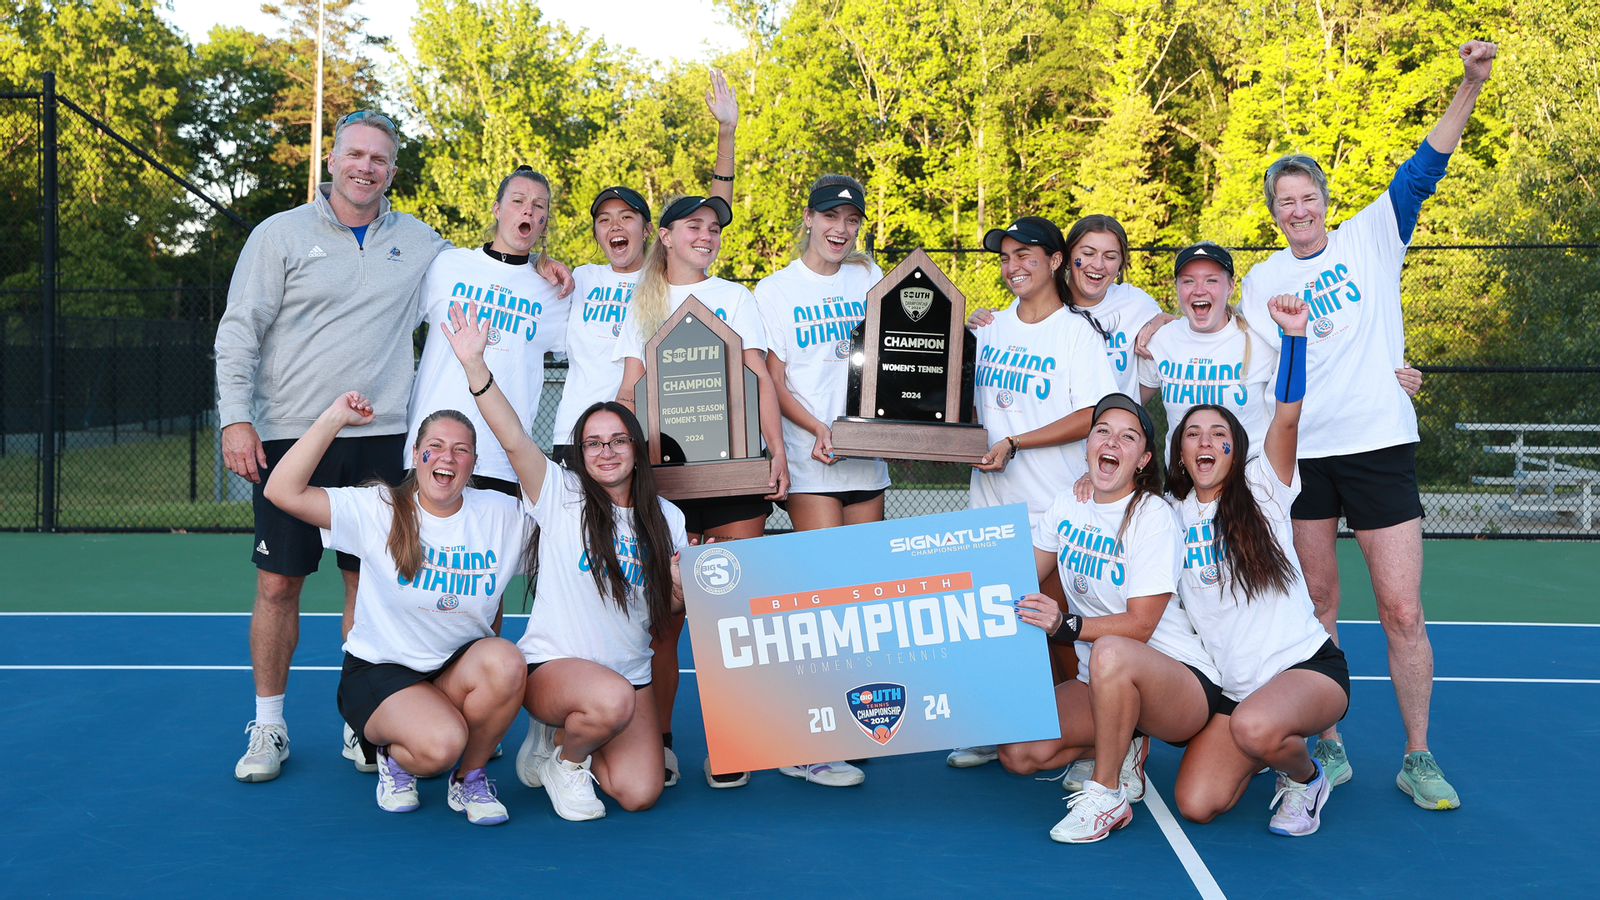 CHAMPIONS! Asheville Women’s Tennis Wins Big South Conference Championship